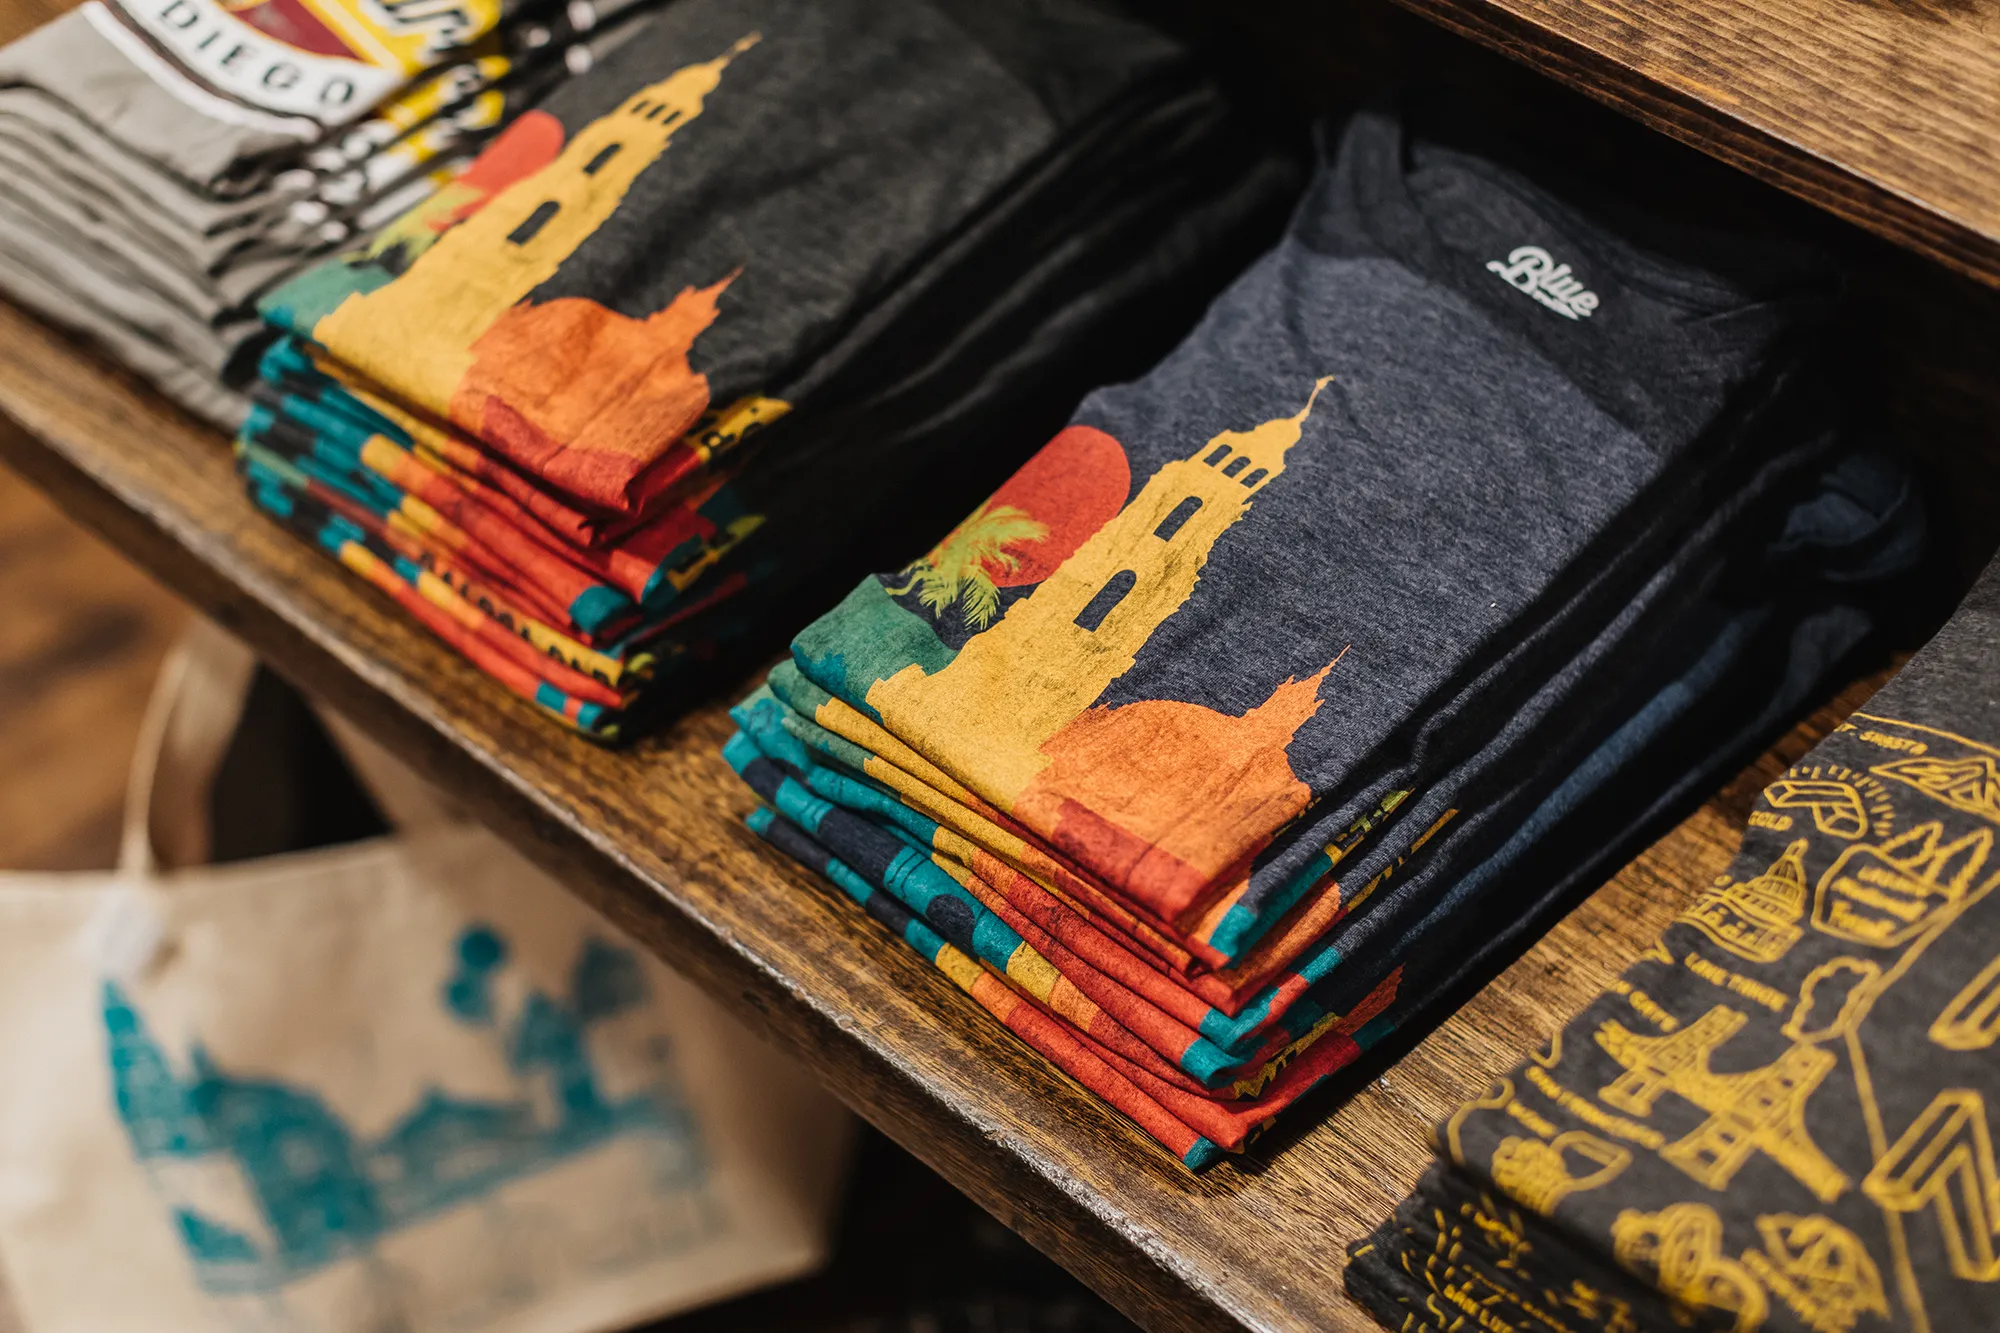 Dark blue t-shirts with yellow outline of California Tower